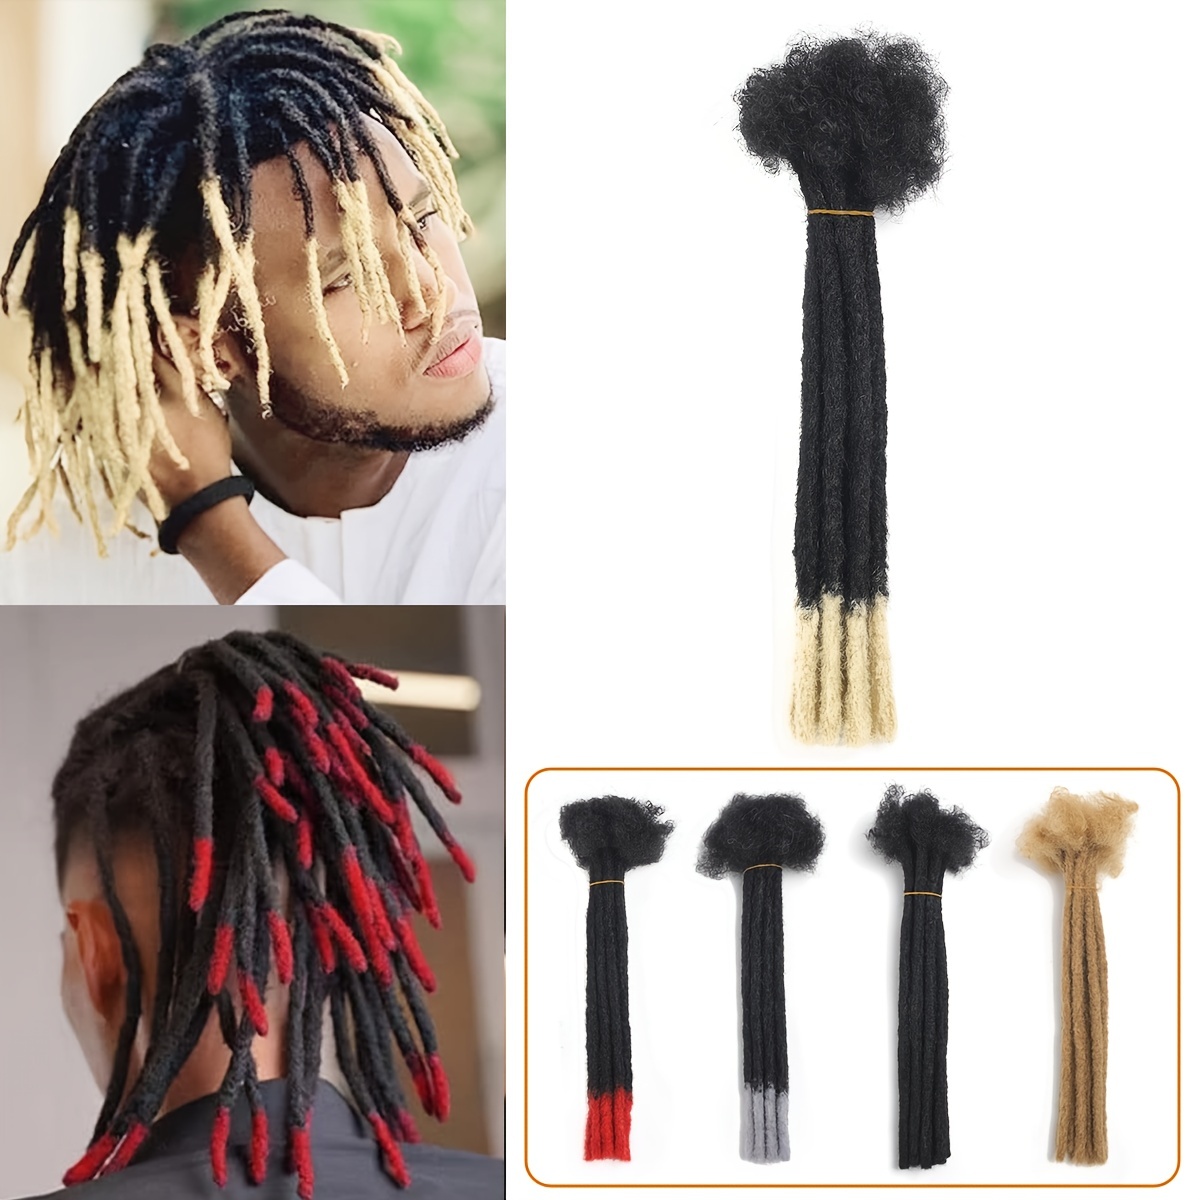 DSoar Crochet Dreadlock Extensions Black Men and Women With Dreads  Hairstyles 40 PCS Reggae Hair 20 Inch